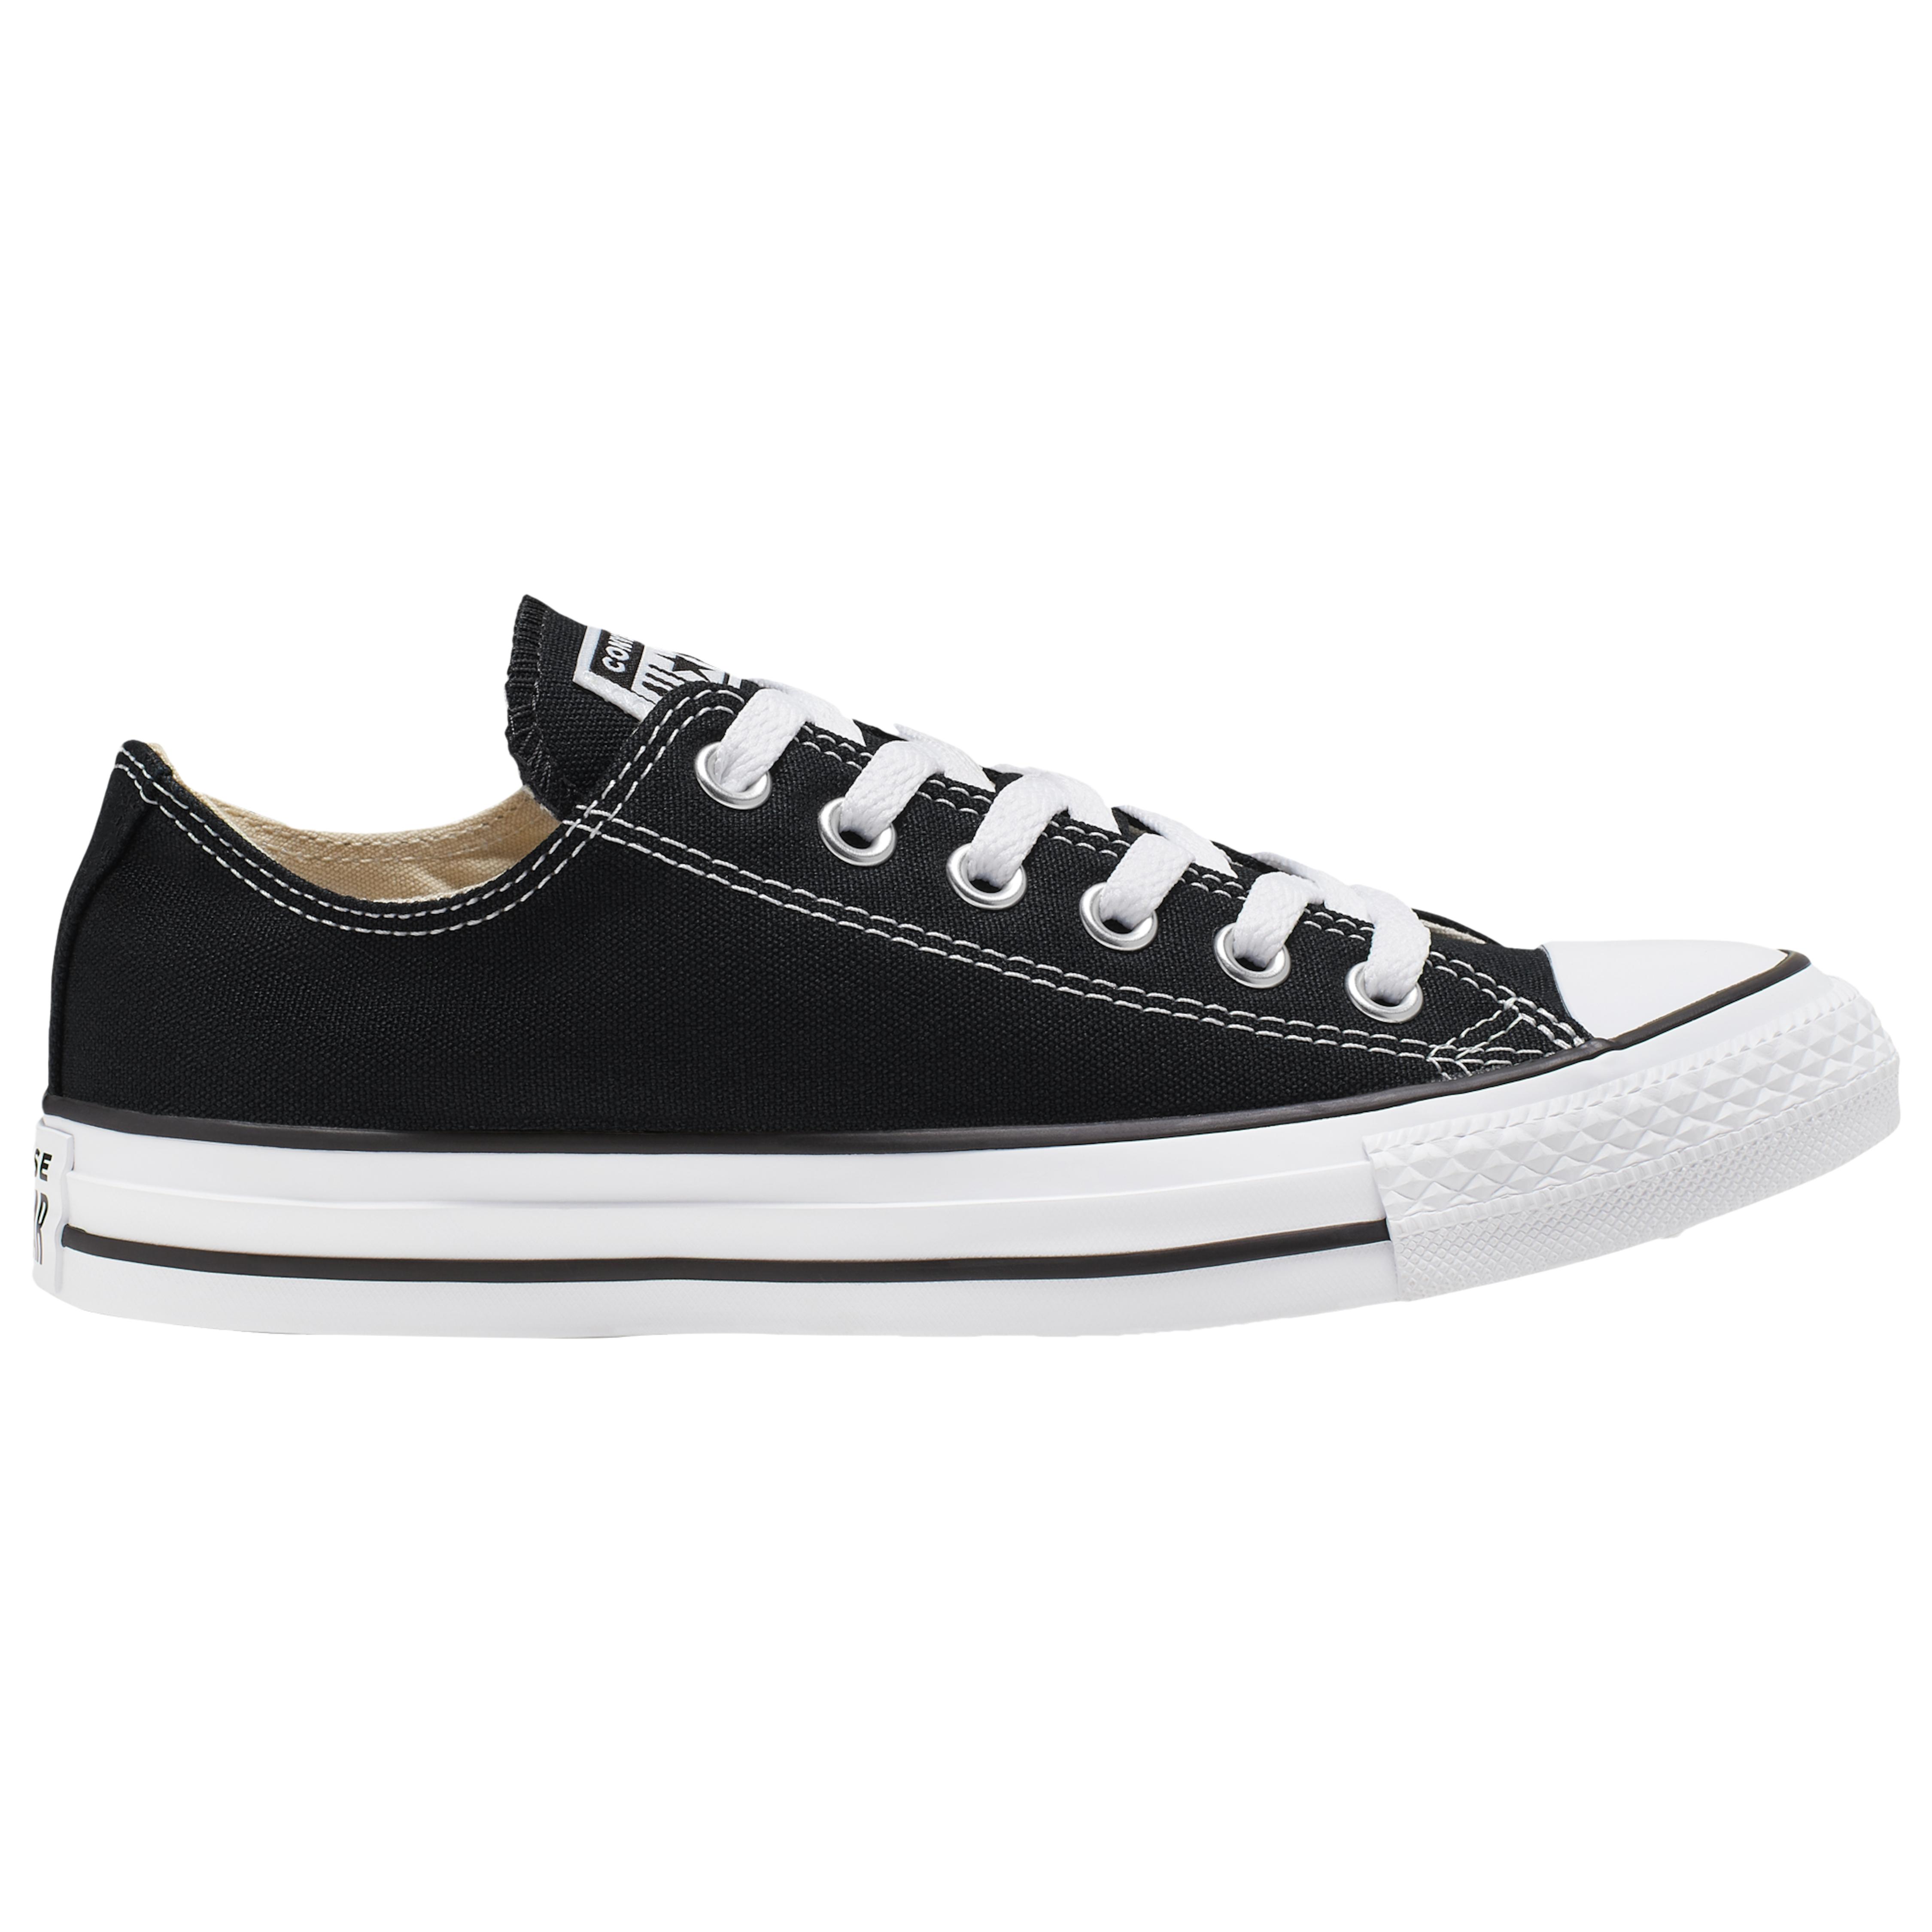 Converse Canvas All Star Ox in Black/White (Black) - Lyst